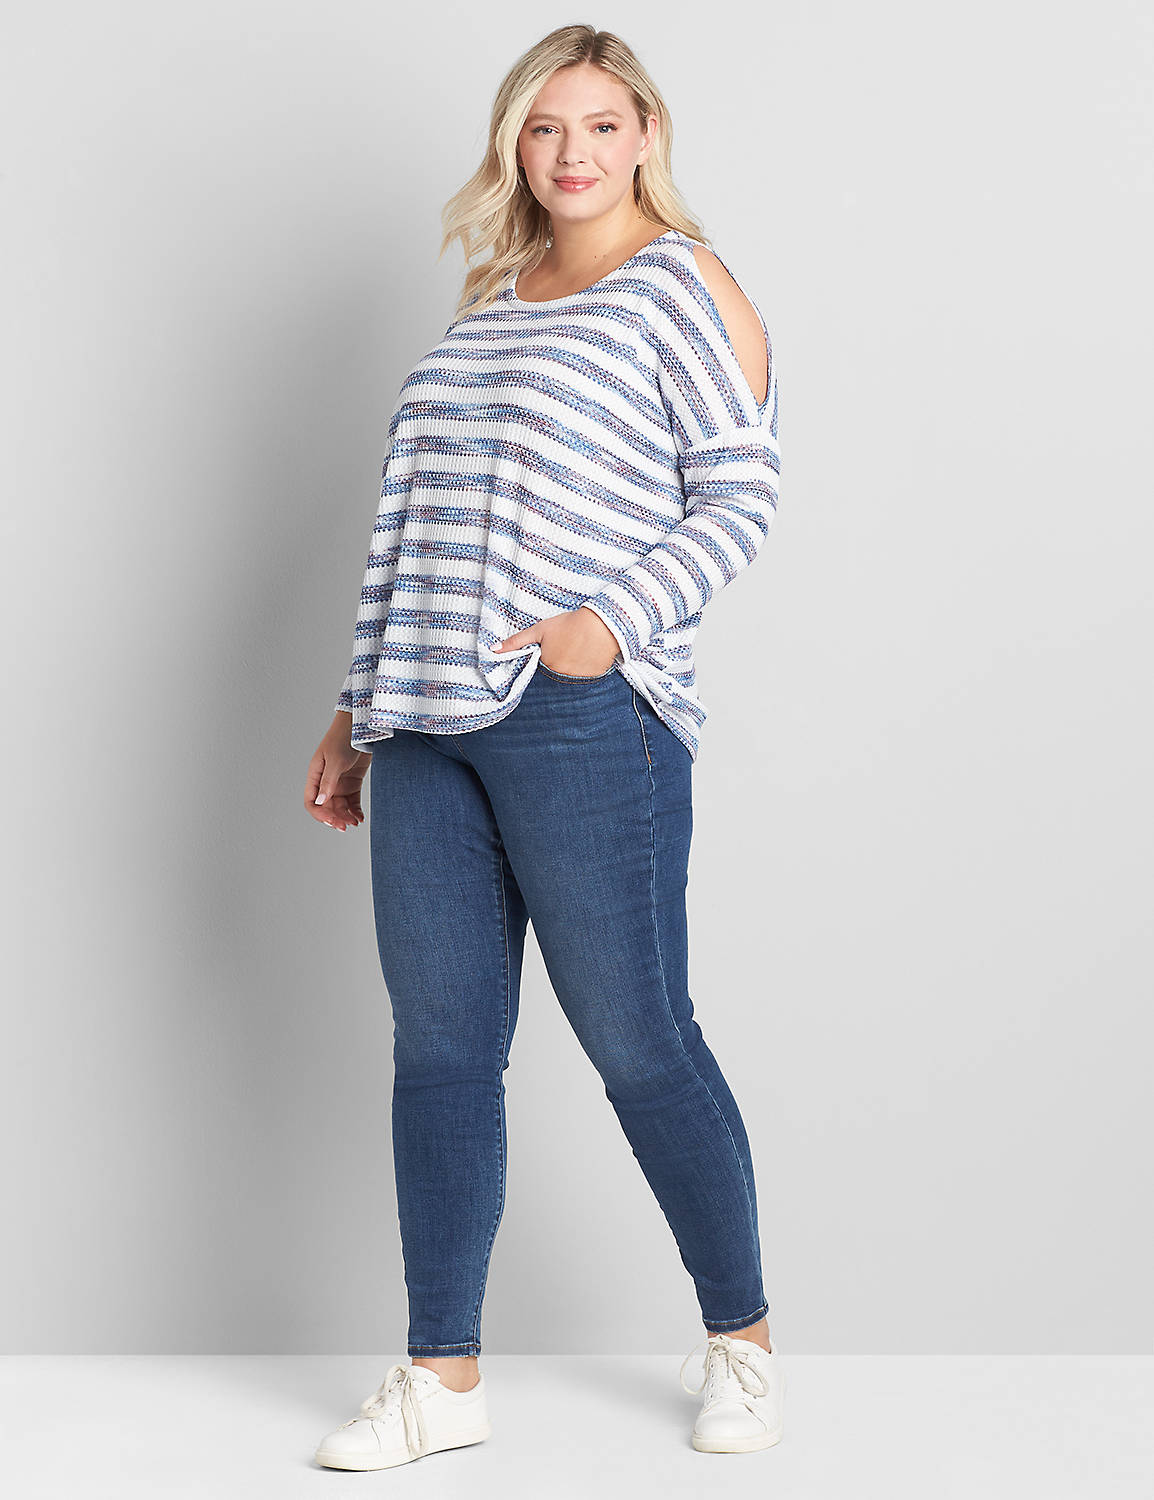 Long Sleeve Open Crew Neck With Cutout Shoulders In Space Dye Stripe:Stripe:10/12 Product Image 3